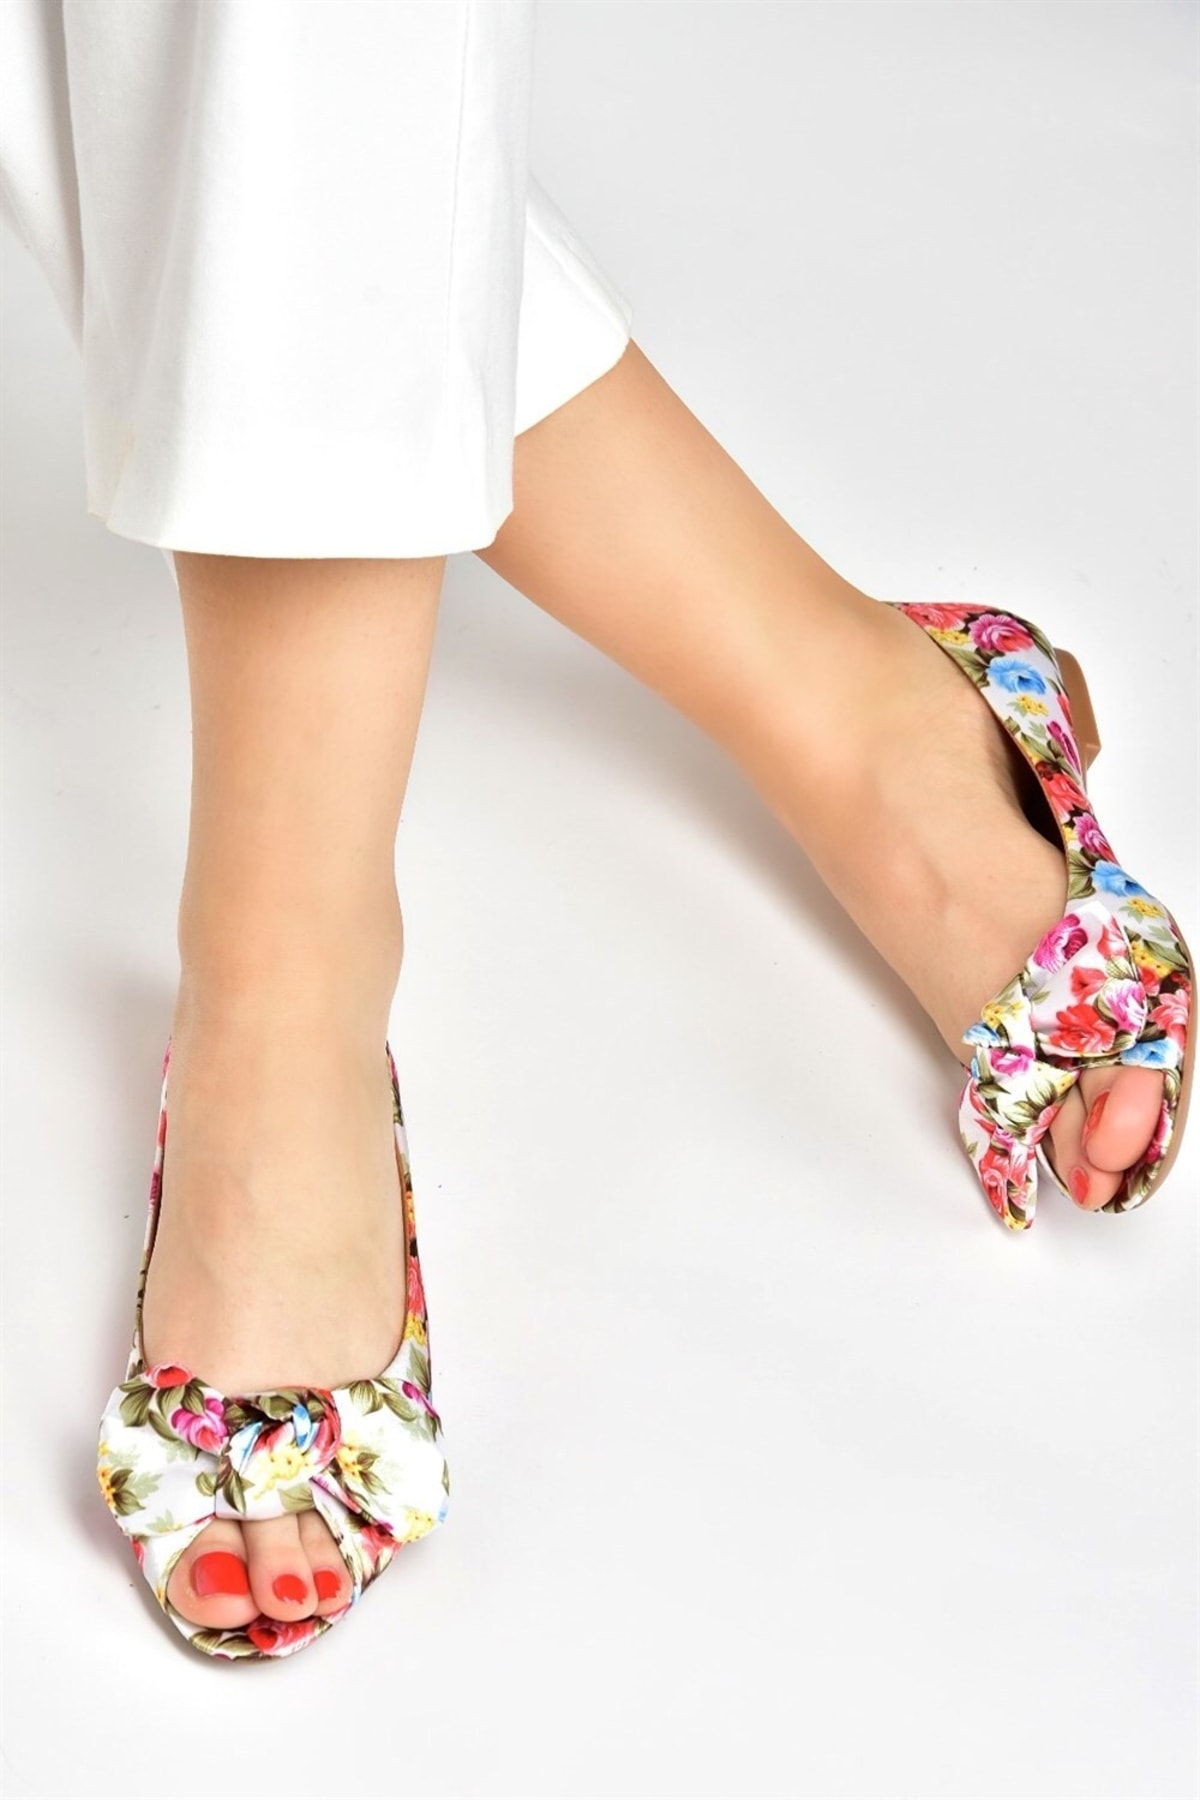 Fox Shoes White/red Linen Women's Flats with Floral Print